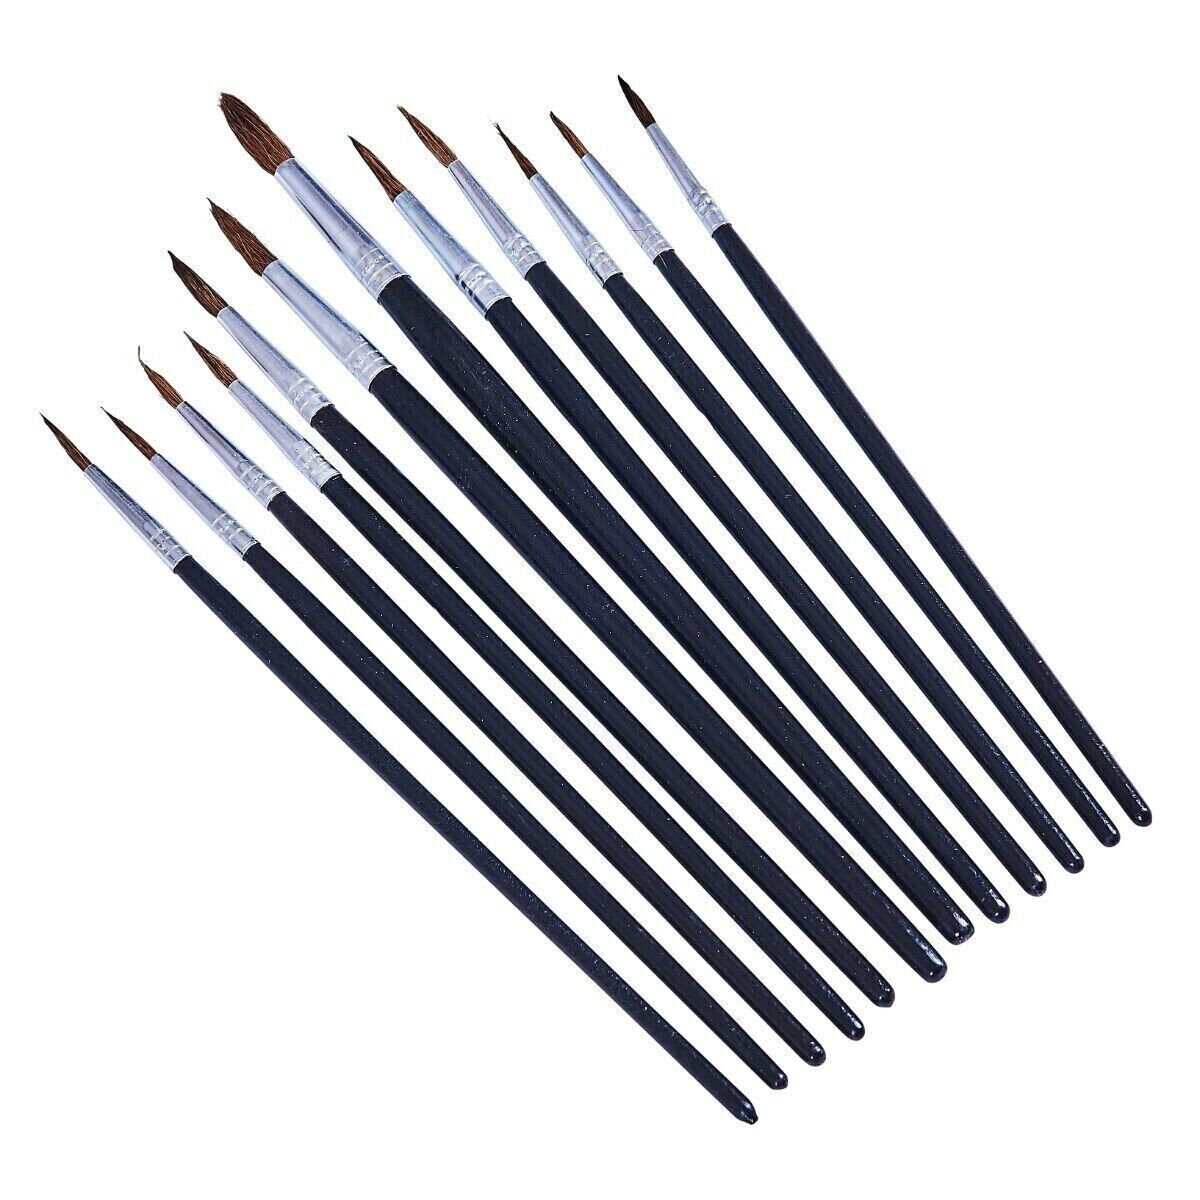 ARTEGRIA Detail Paint Brush Set 5 Miniature Paint Brushes Size Round 3/0  000 for Small Model Art Paint by Numbers Acrylic Watercolor Oil 